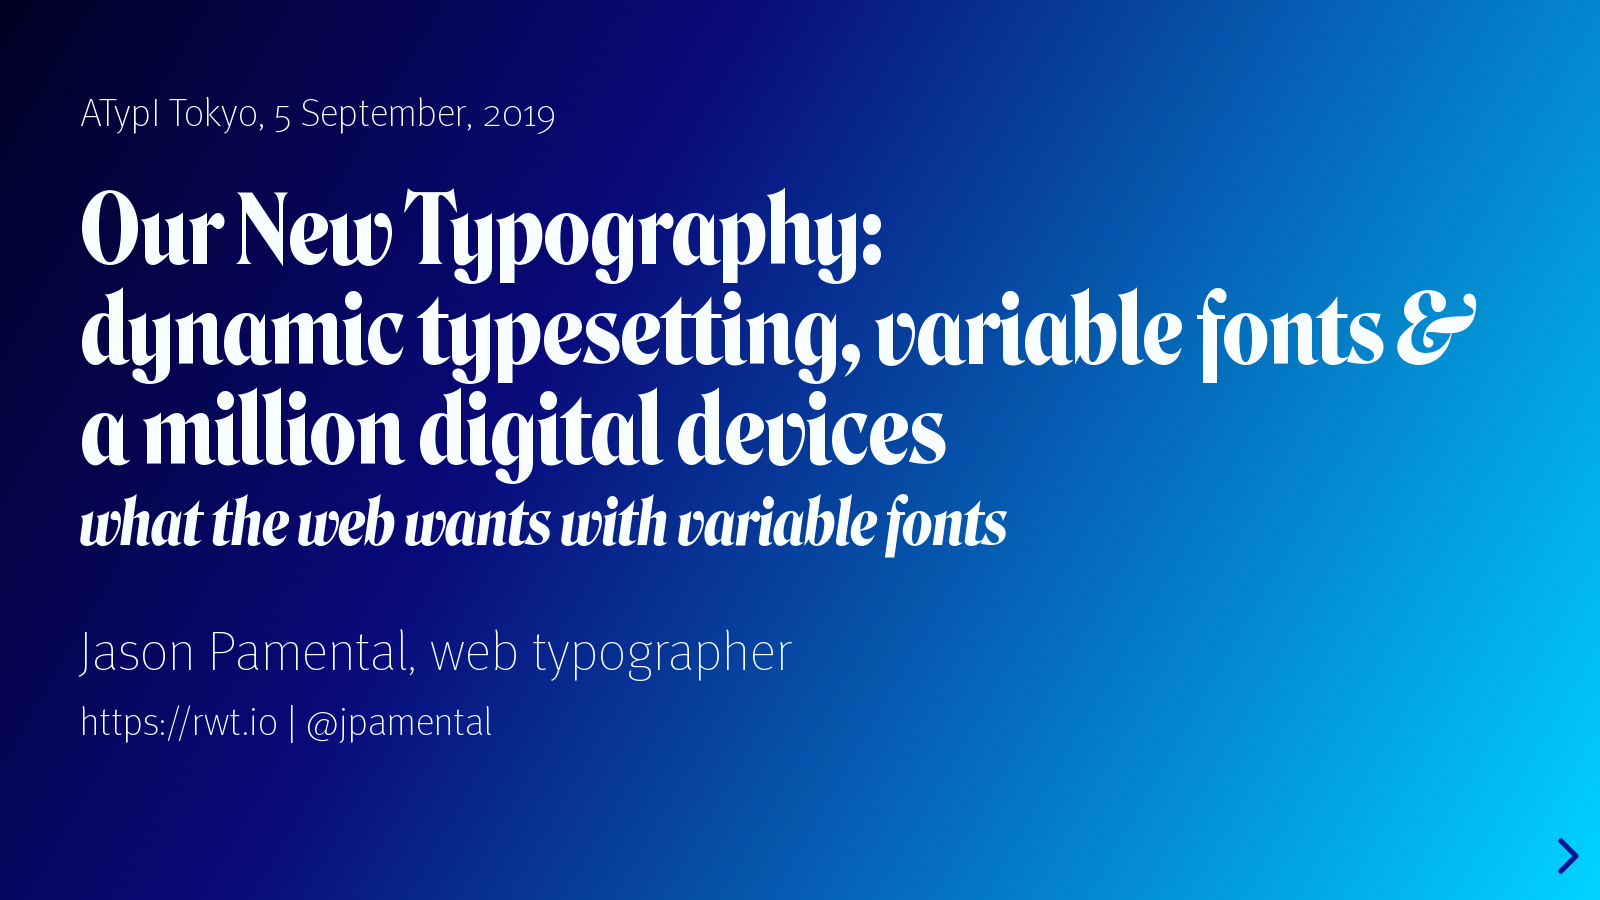 Our New Typography: dynamic typesetting, variable fonts, and a million digital devices